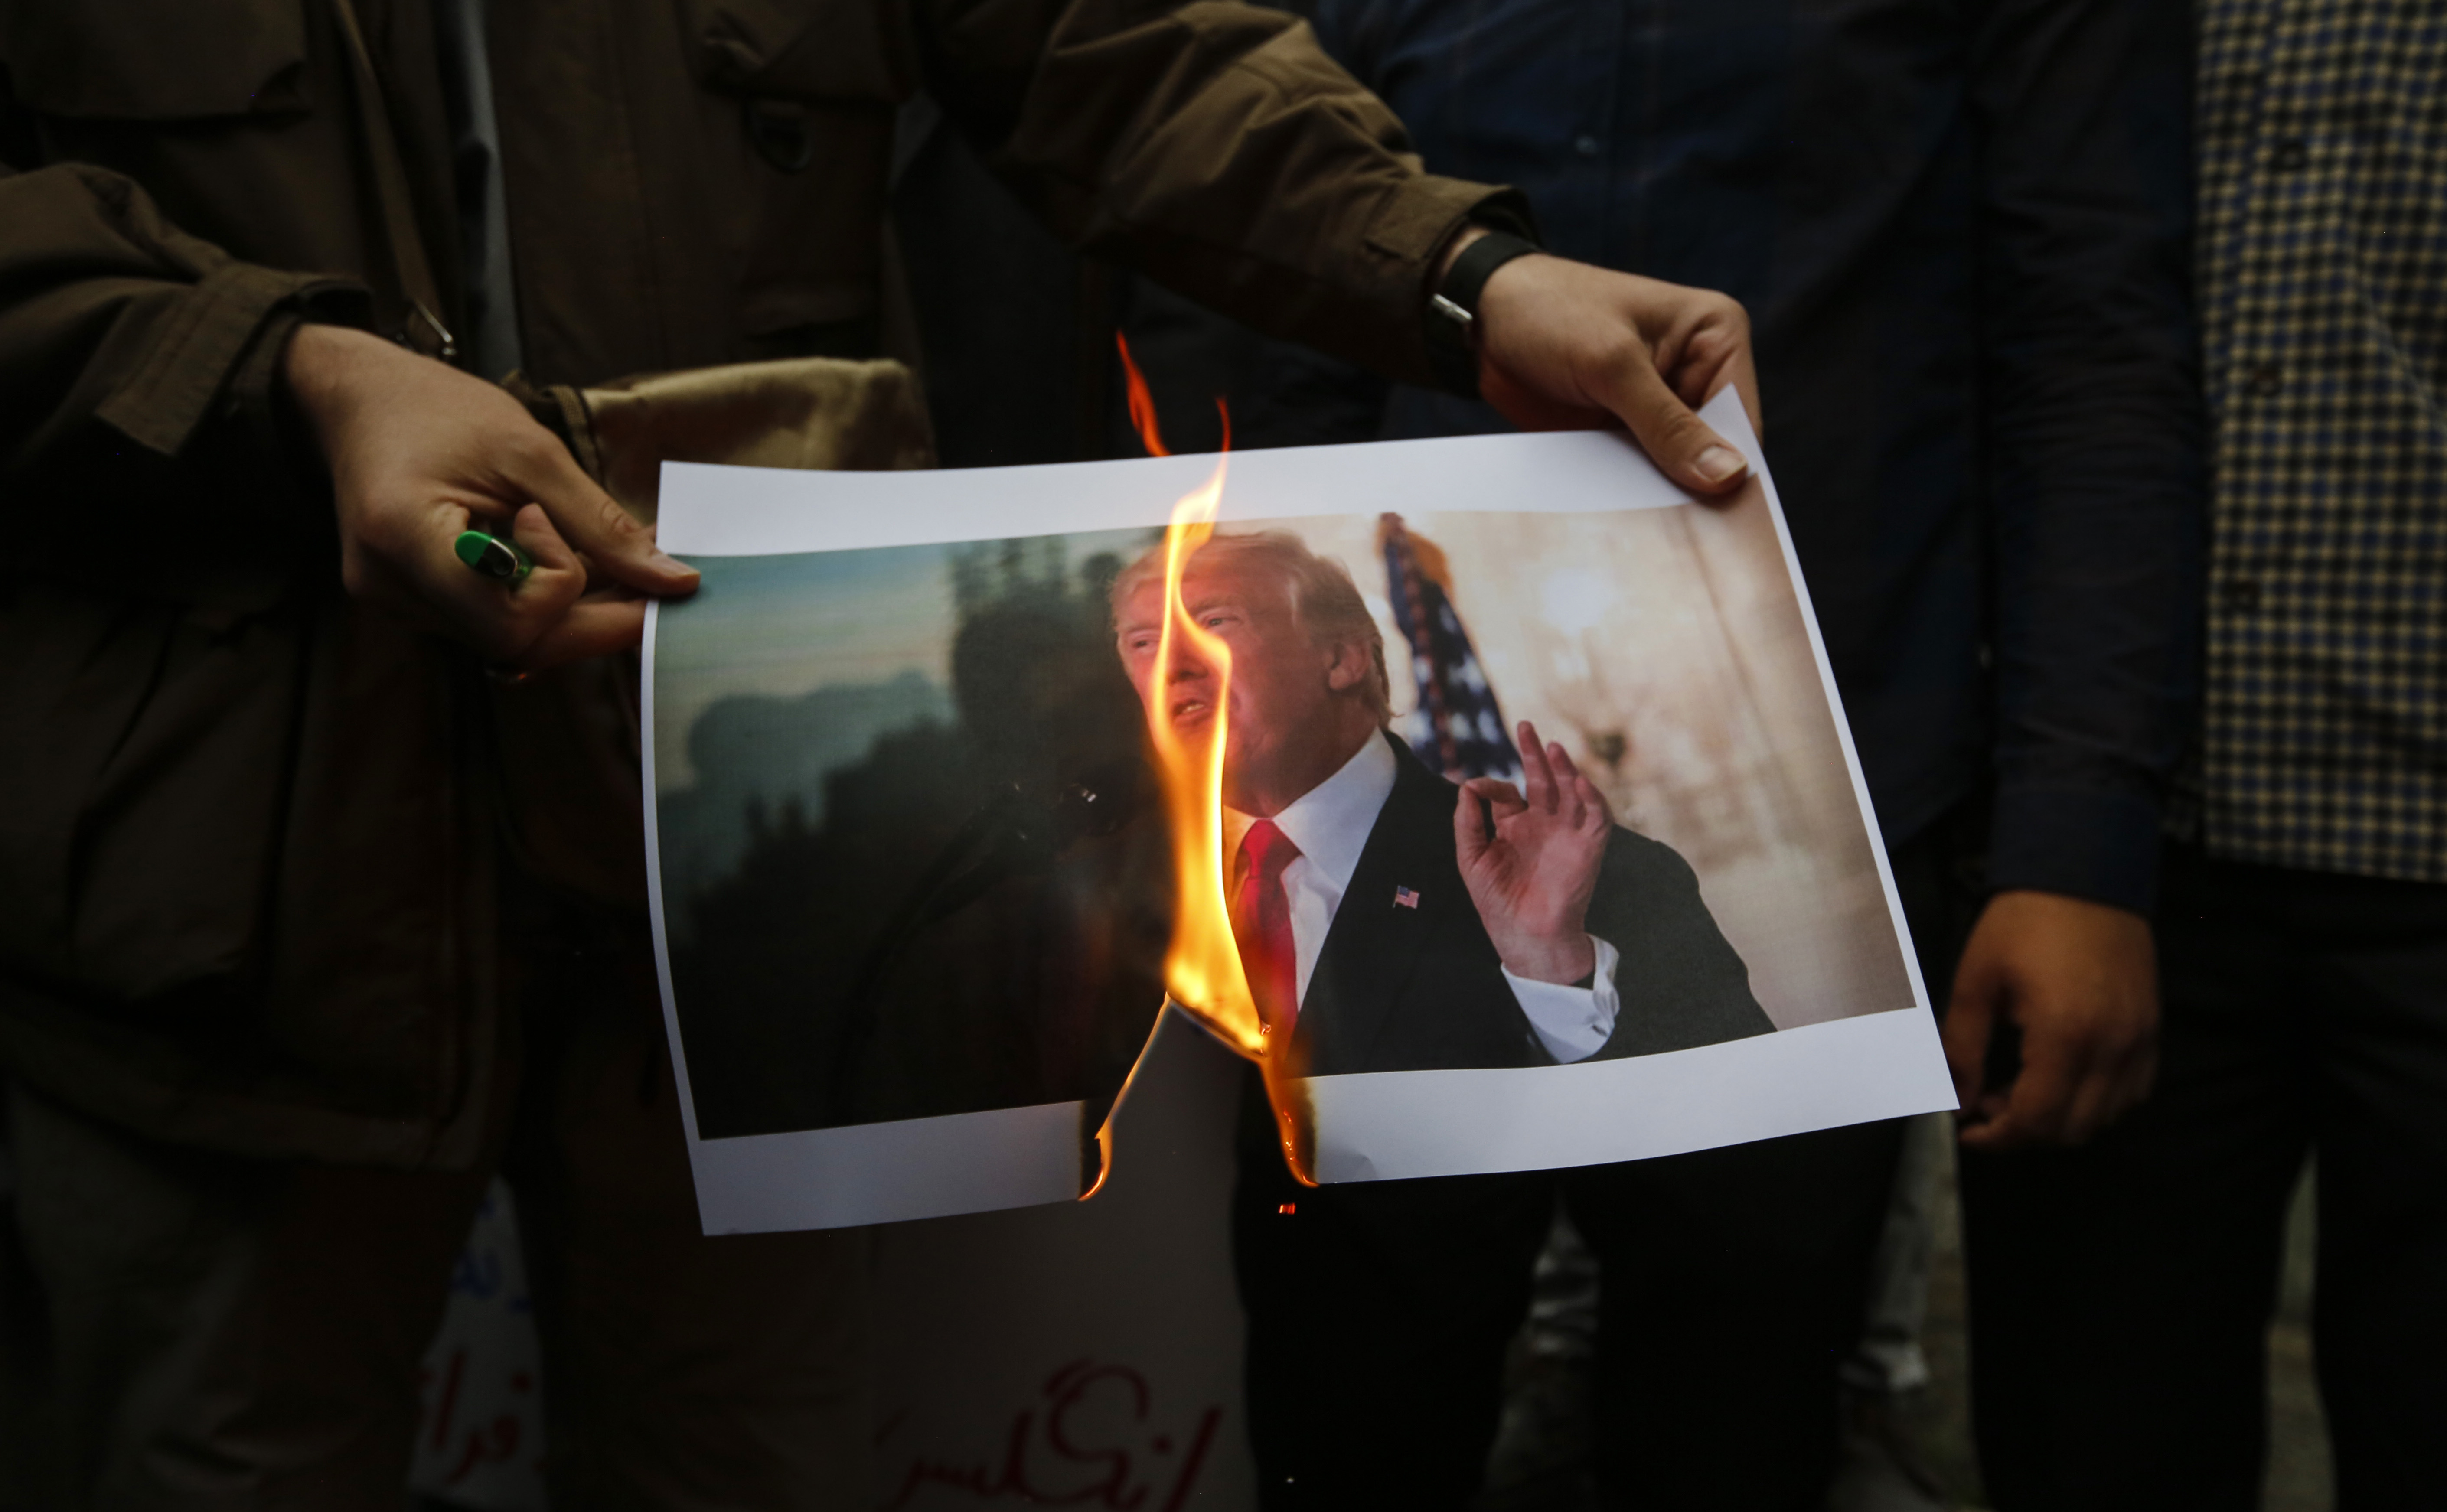 Iranians burn an image of US President Donald Trump during an anti-US demonstration outside the former US embassy headquarters in the capital Tehran on May 9, 2018. - Iranians reacted with a mix of sadness, resignation and defiance on May 9 to US President Donald Trump's withdrawal from the nuclear deal, with sharp divisions among officials on how best to respond. For many, Trump's decision on Tuesday to pull out of the landmark nuclear deal marked the final death knell for the hope created when it was signed in 2015 that Iran might finally escape decades of isolation and US hostility. (Photo by ATTA KENARE/AFP/Getty Images)